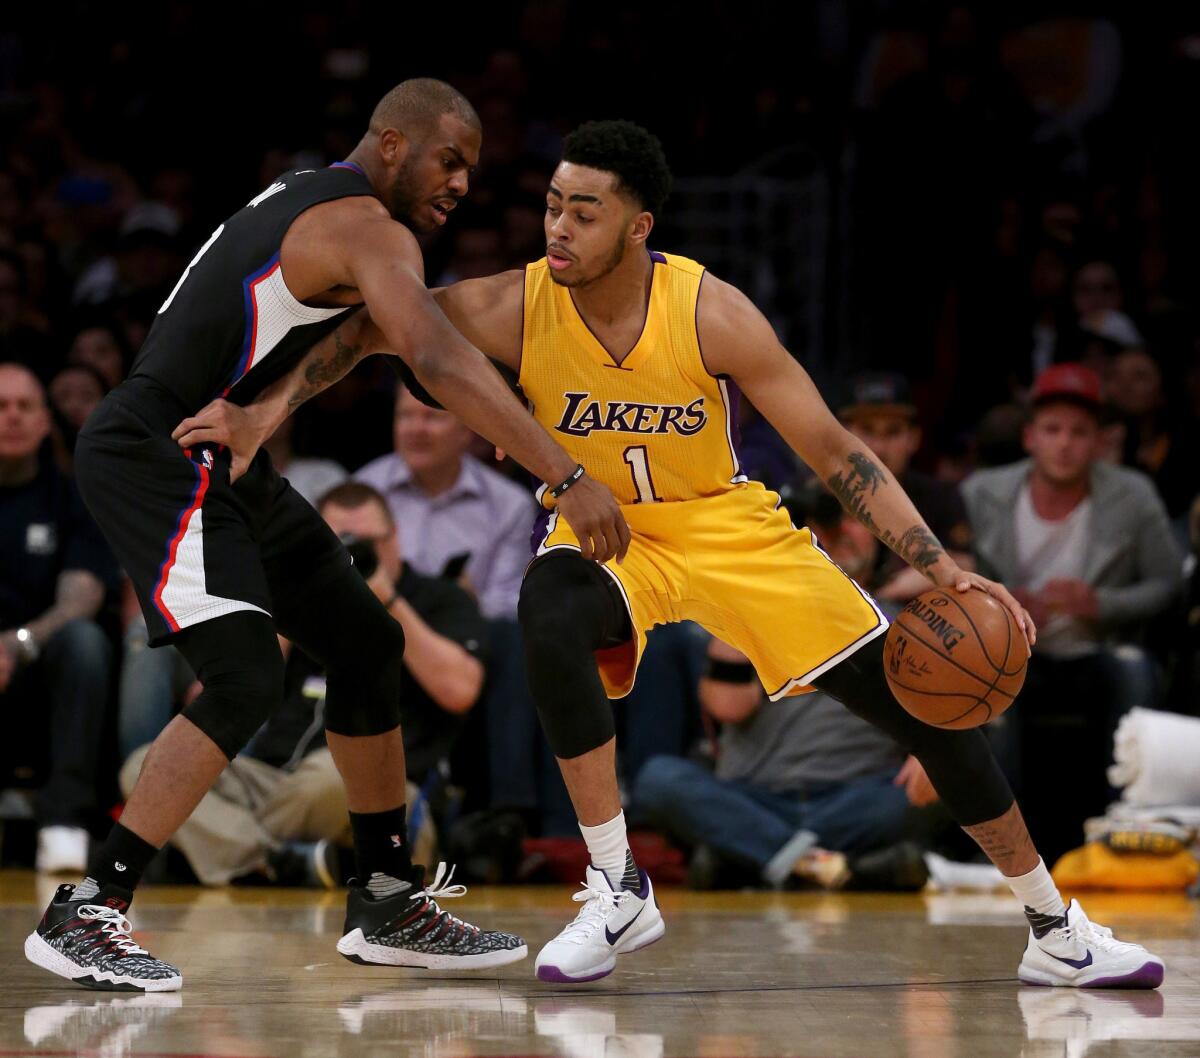 Clippers guard Chris Paul, shown defending against Lakers guard D'Angelo Russell last season, did not play in the Christmas night loss to their rivals this season.